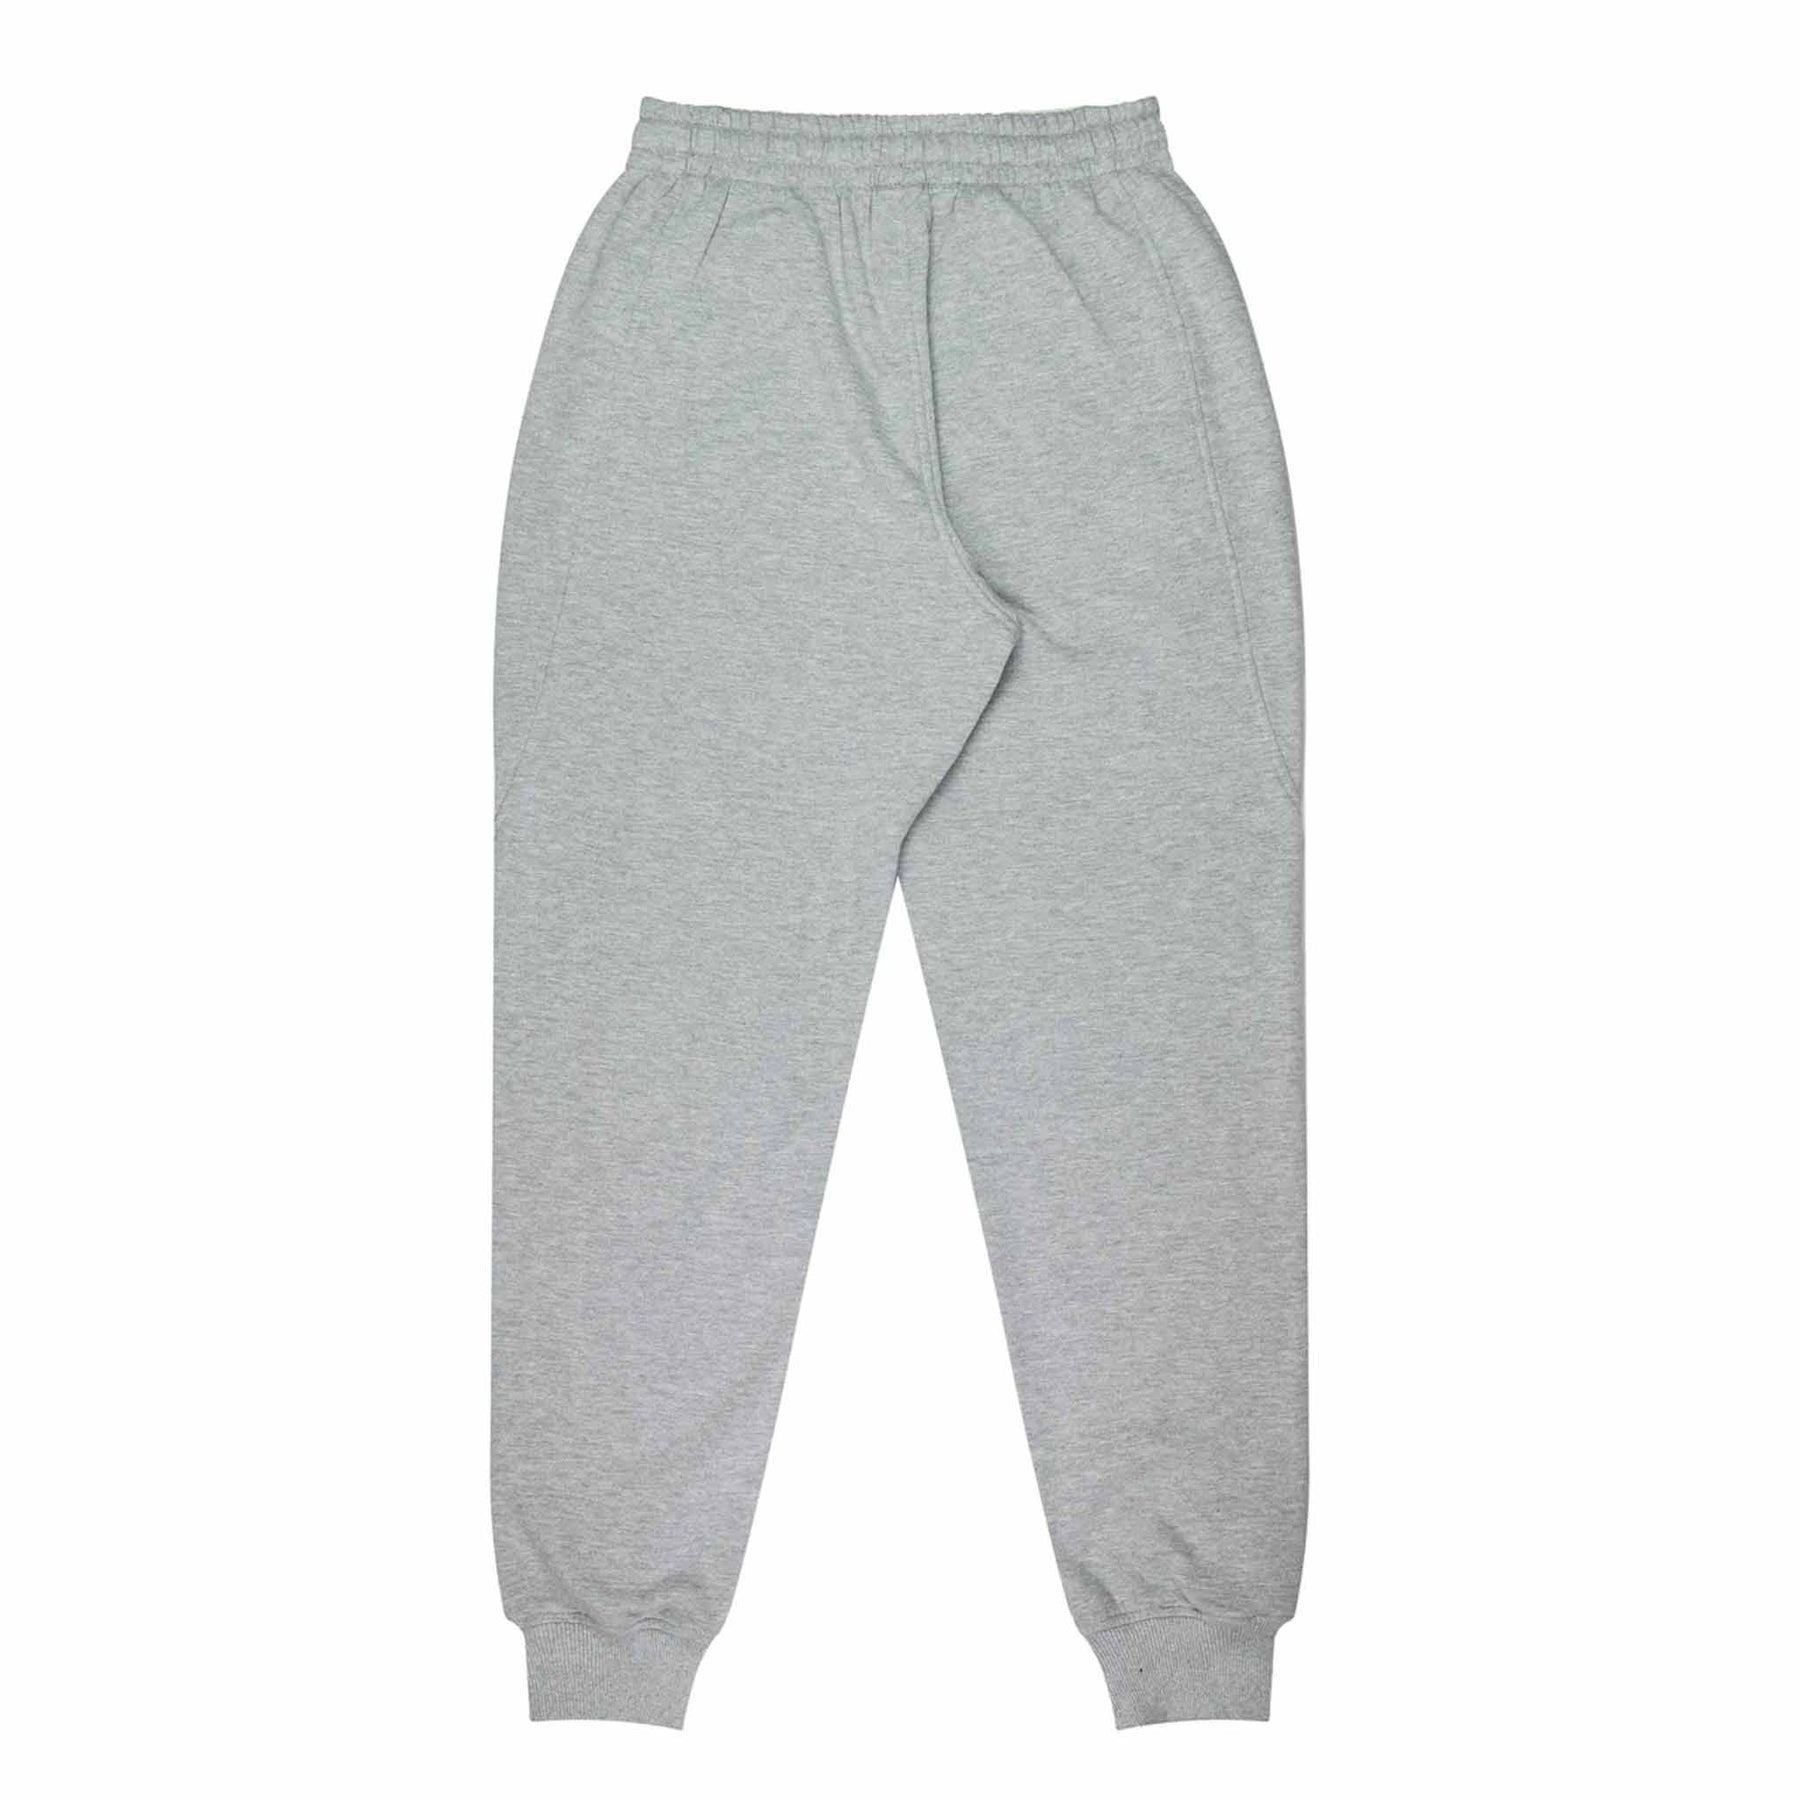 aussie pacific tapered fleece pant in grey